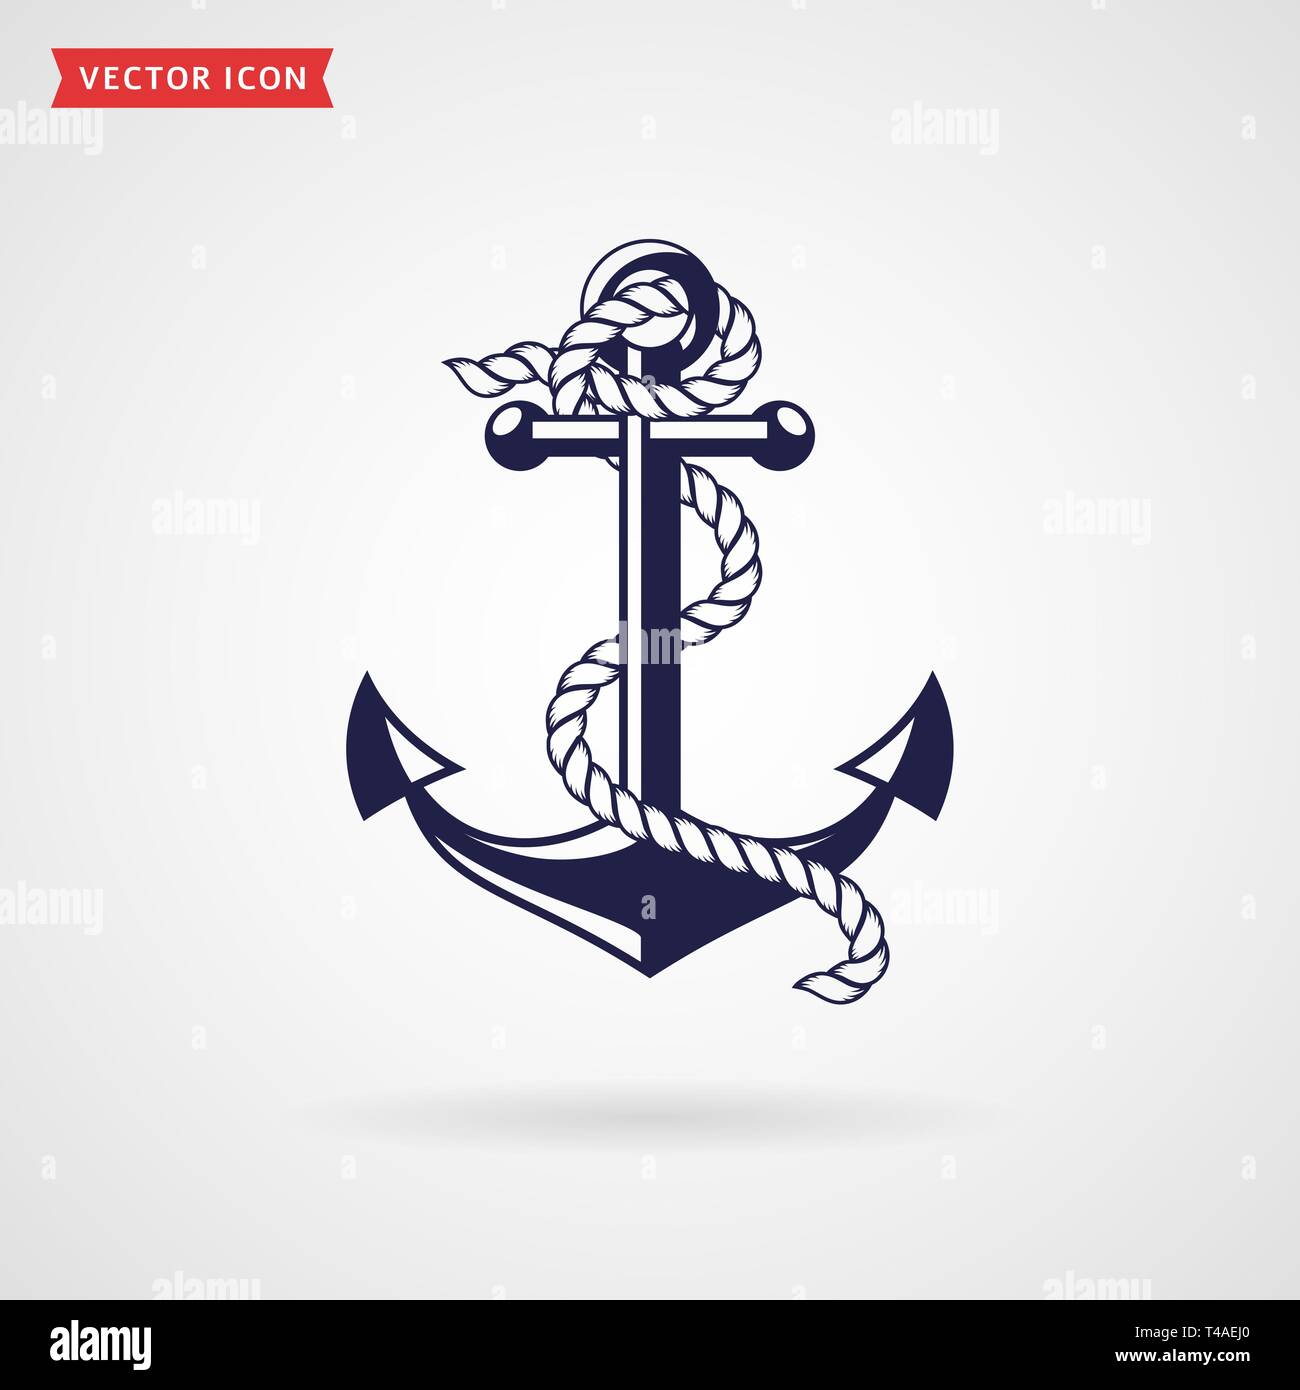 Anchor icon isolated on white background. Silhouette of anchor with rope. Sea, nautical and travel themes. Vector illustration. Stock Vector